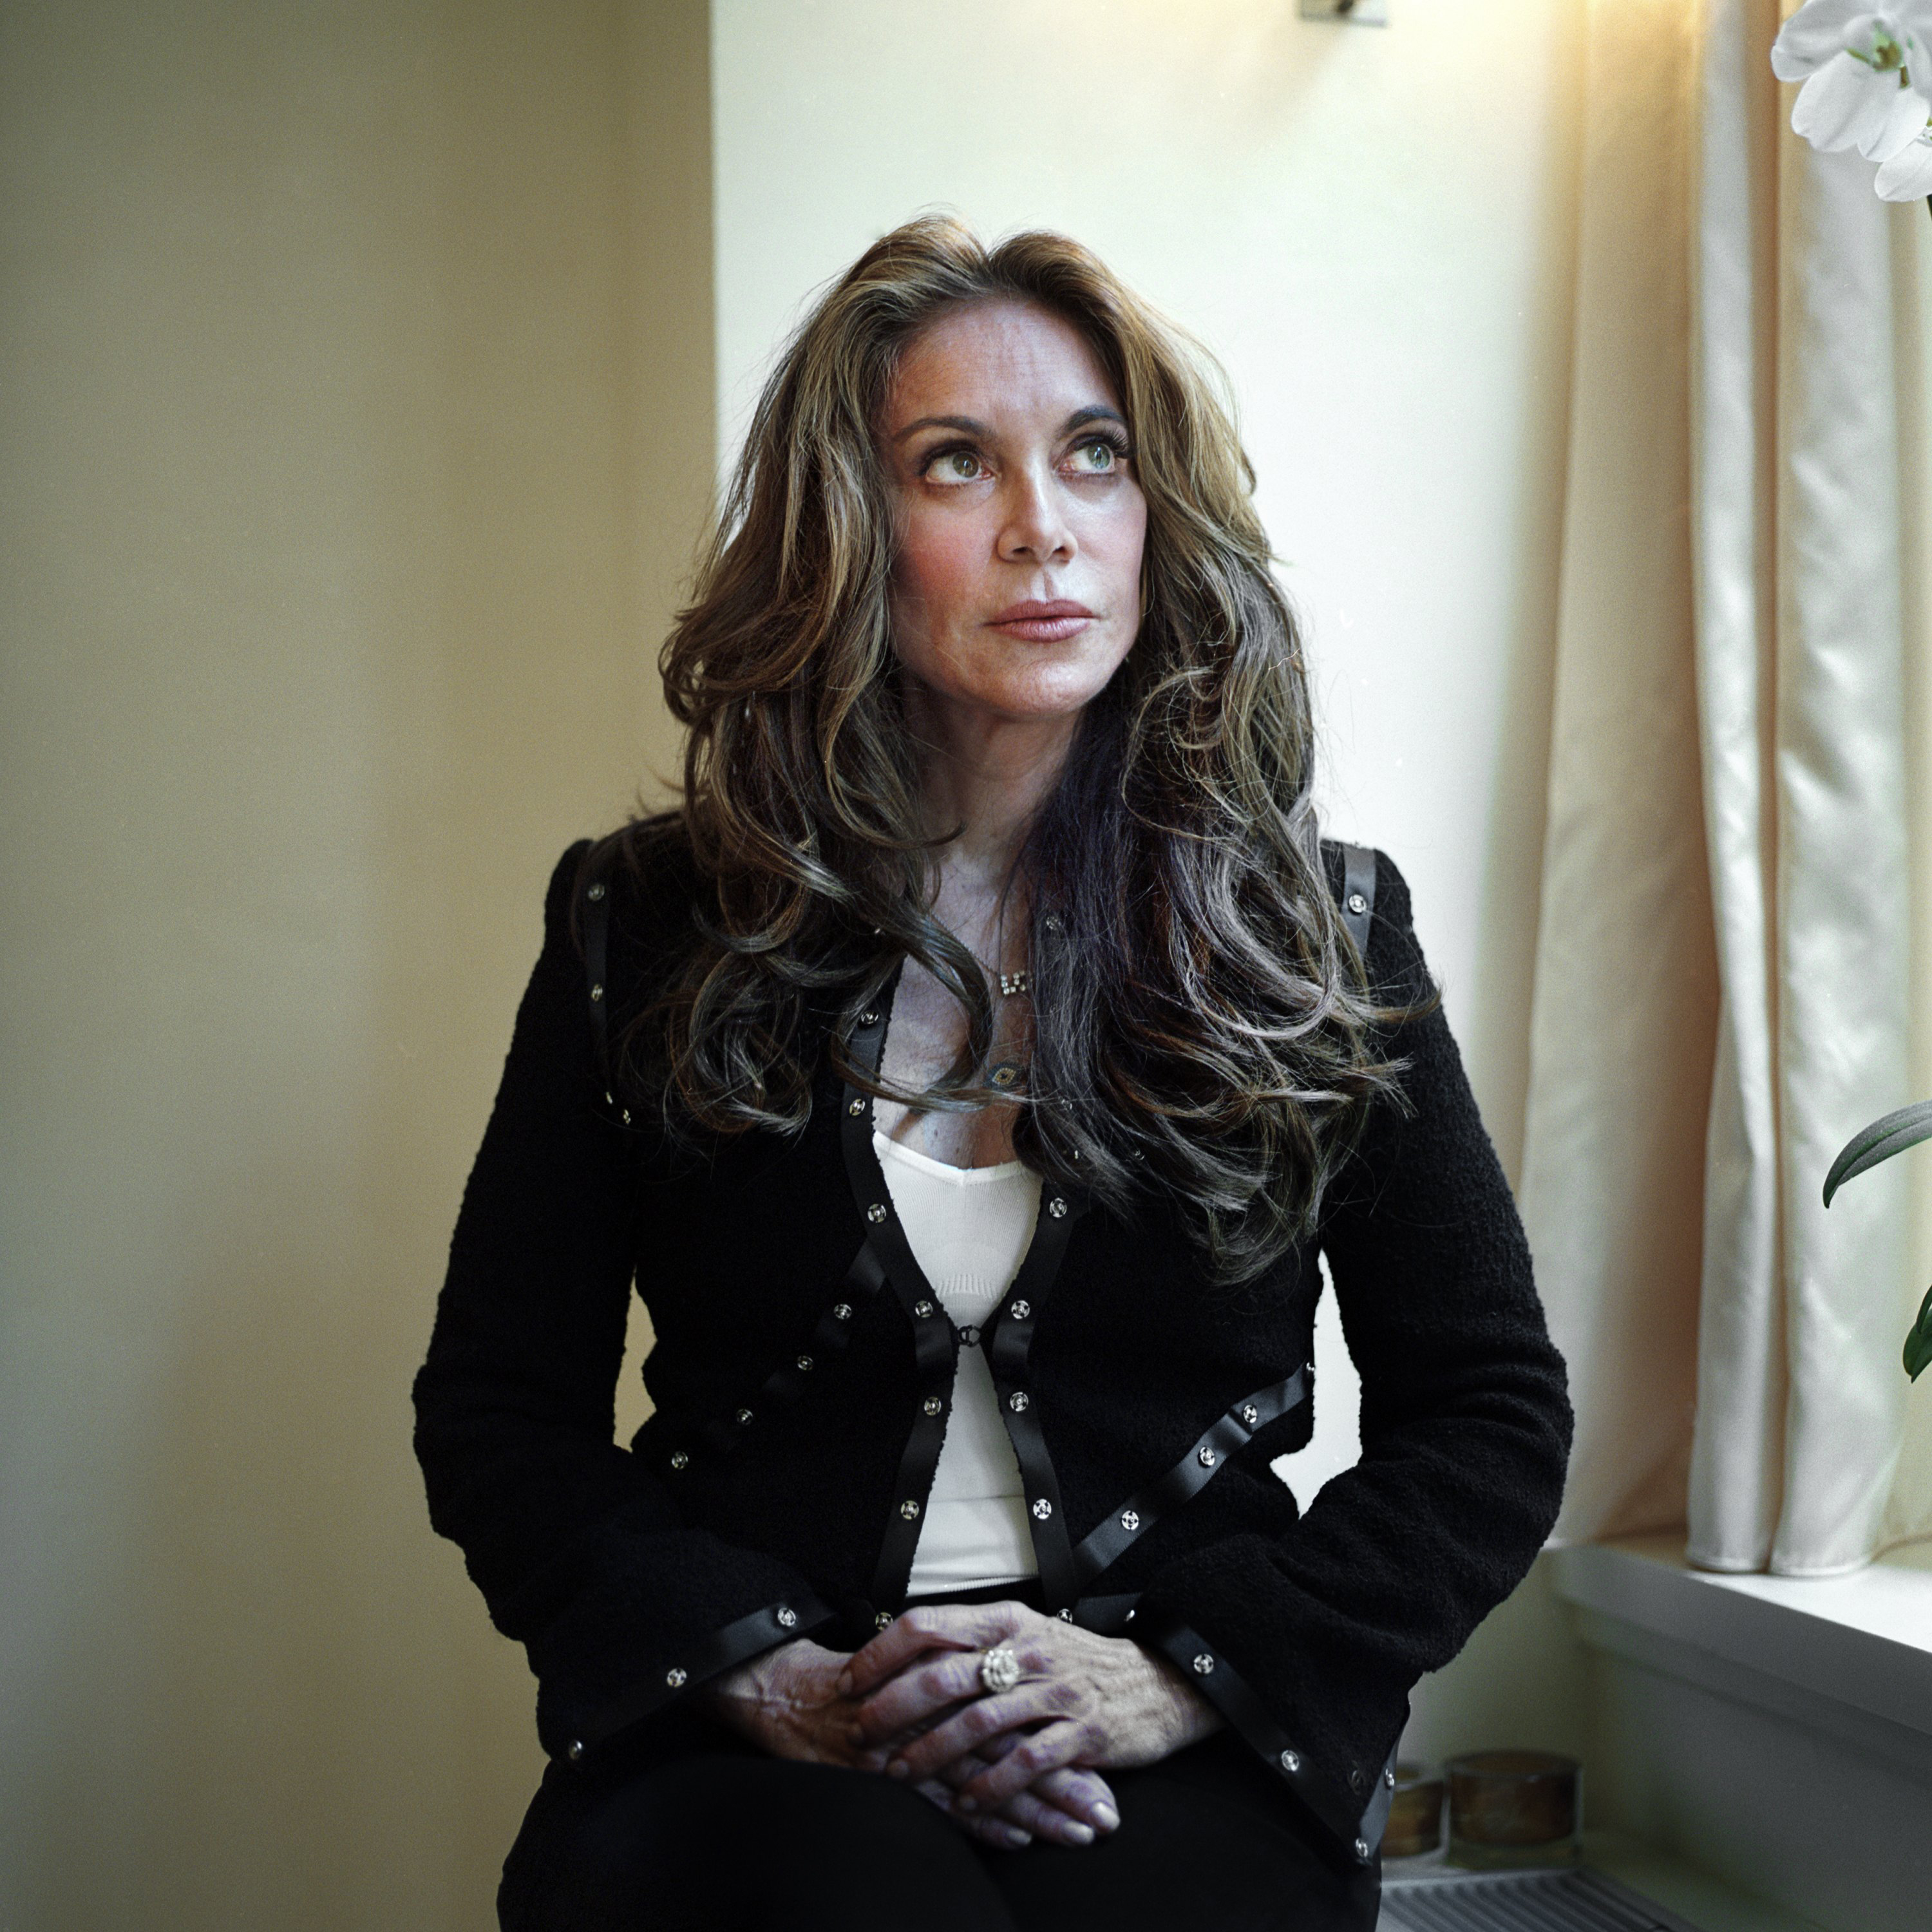 Pamela Geller, author of the book The Post-American Presidency and an opponent of the proposed World Trade Center Islamic Center poses for a portrait inside her home on August 3, 2010 in New York City.